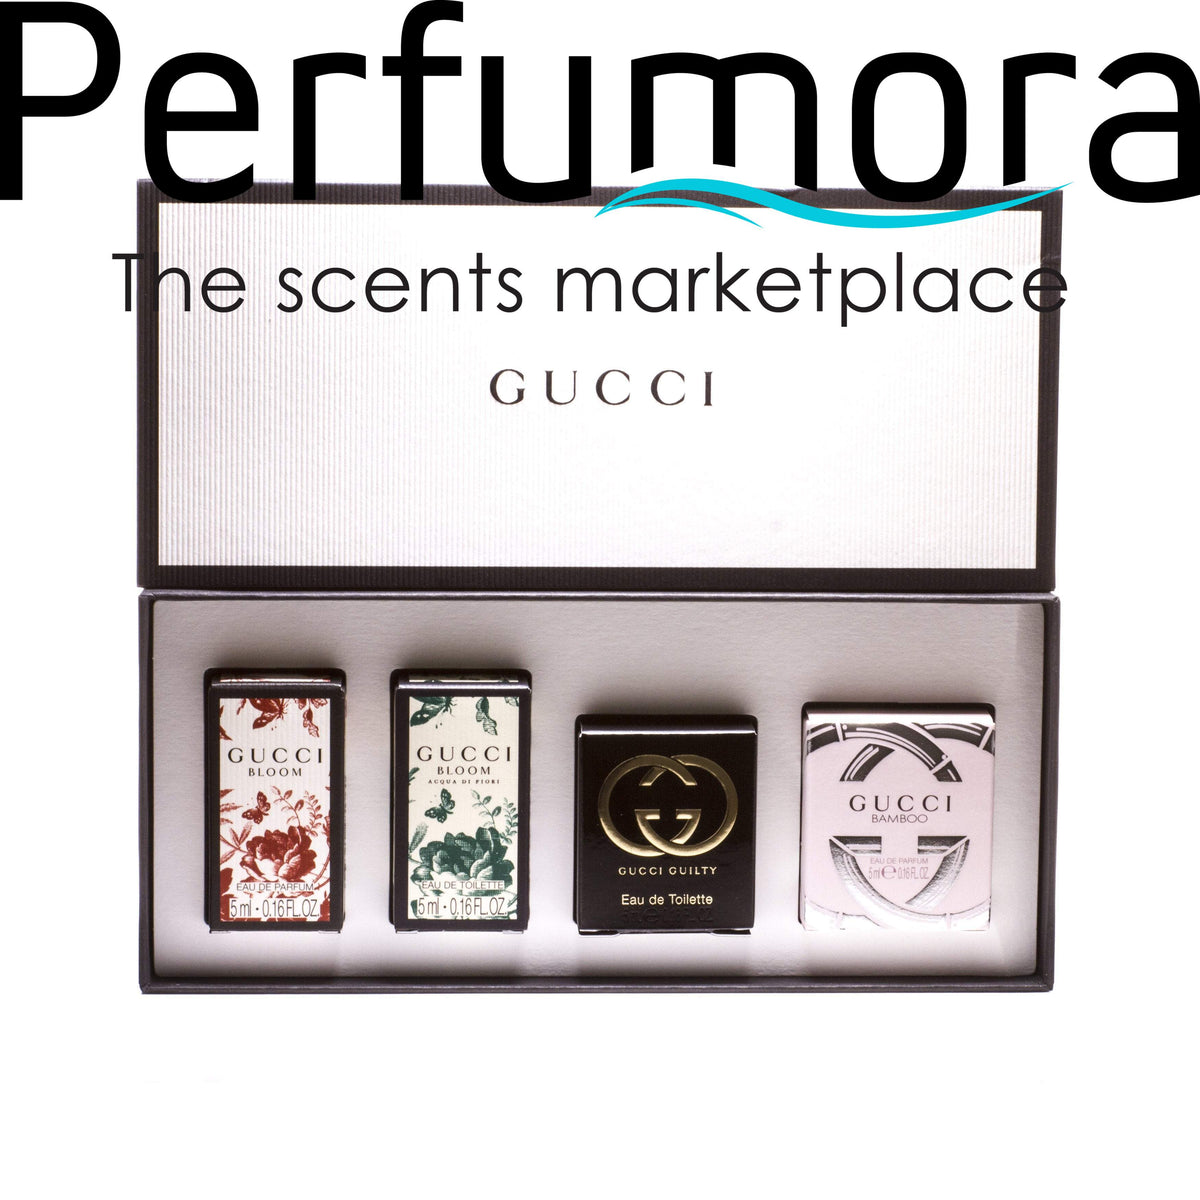 Gucci Miniature Set for Women by Gucci 0.16 oz. Each